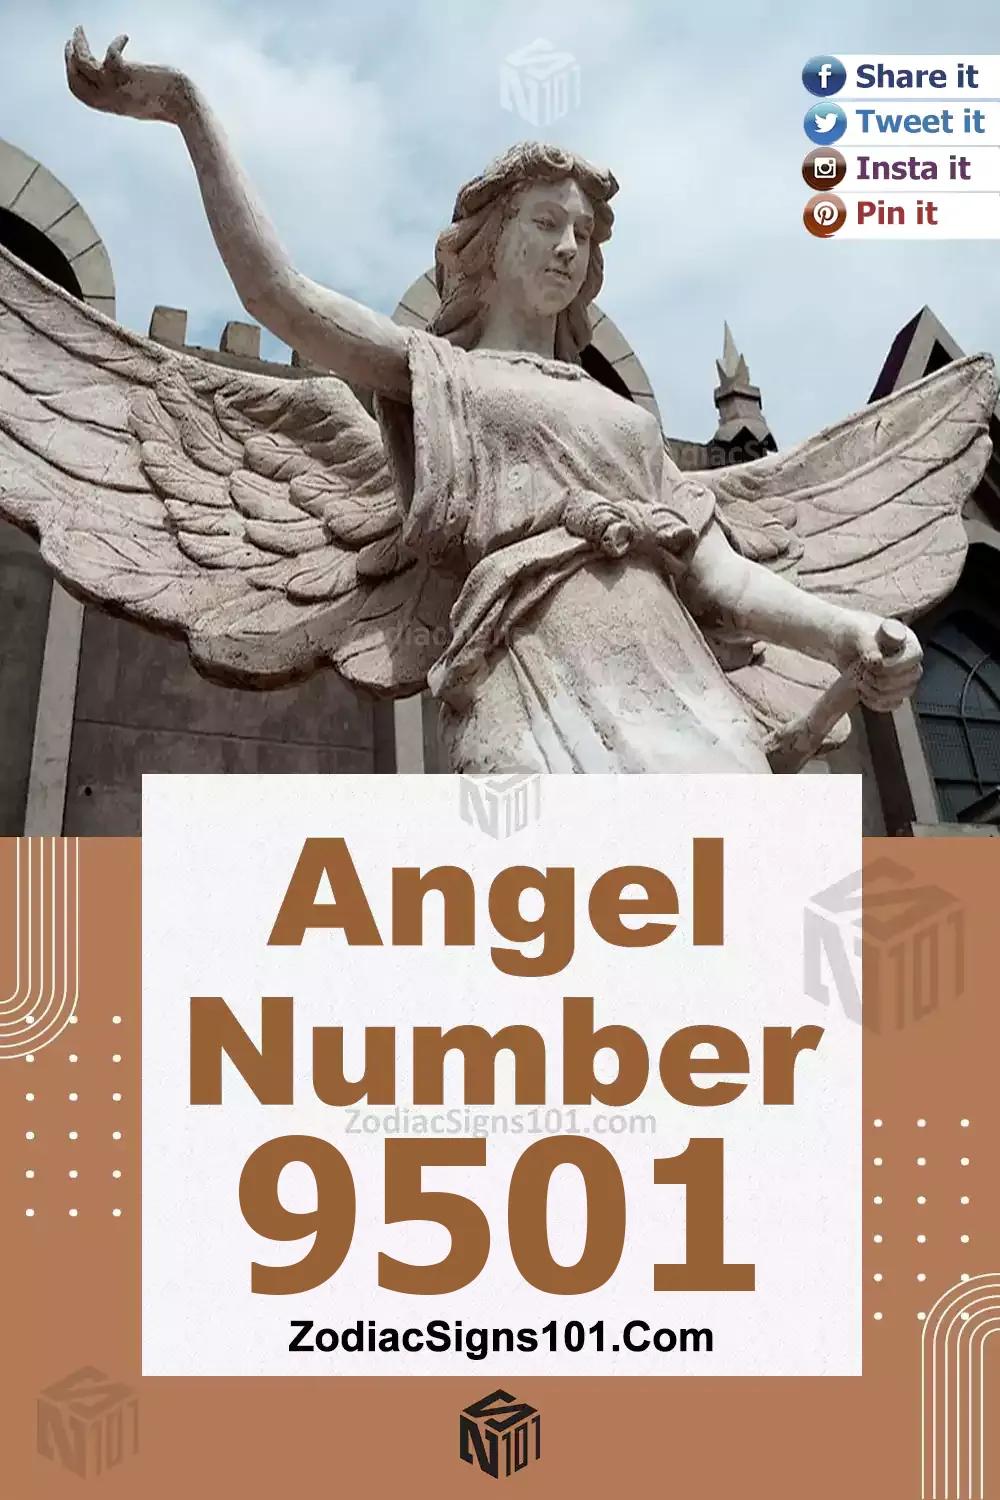 9501 Angel Number Meaning